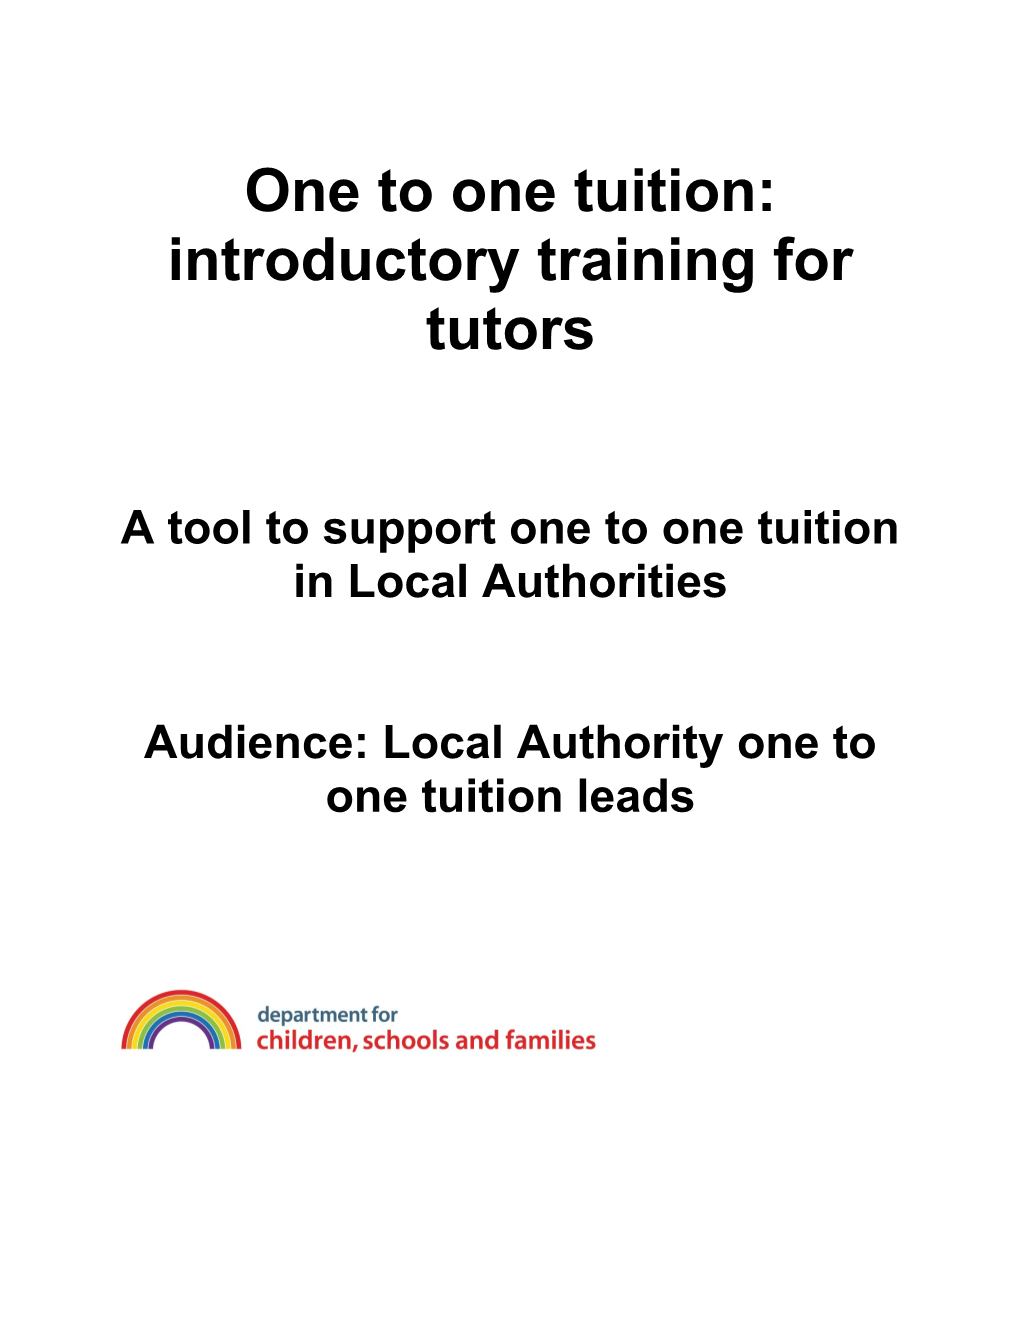 One to One Tuition : Introductory Training for Tutors